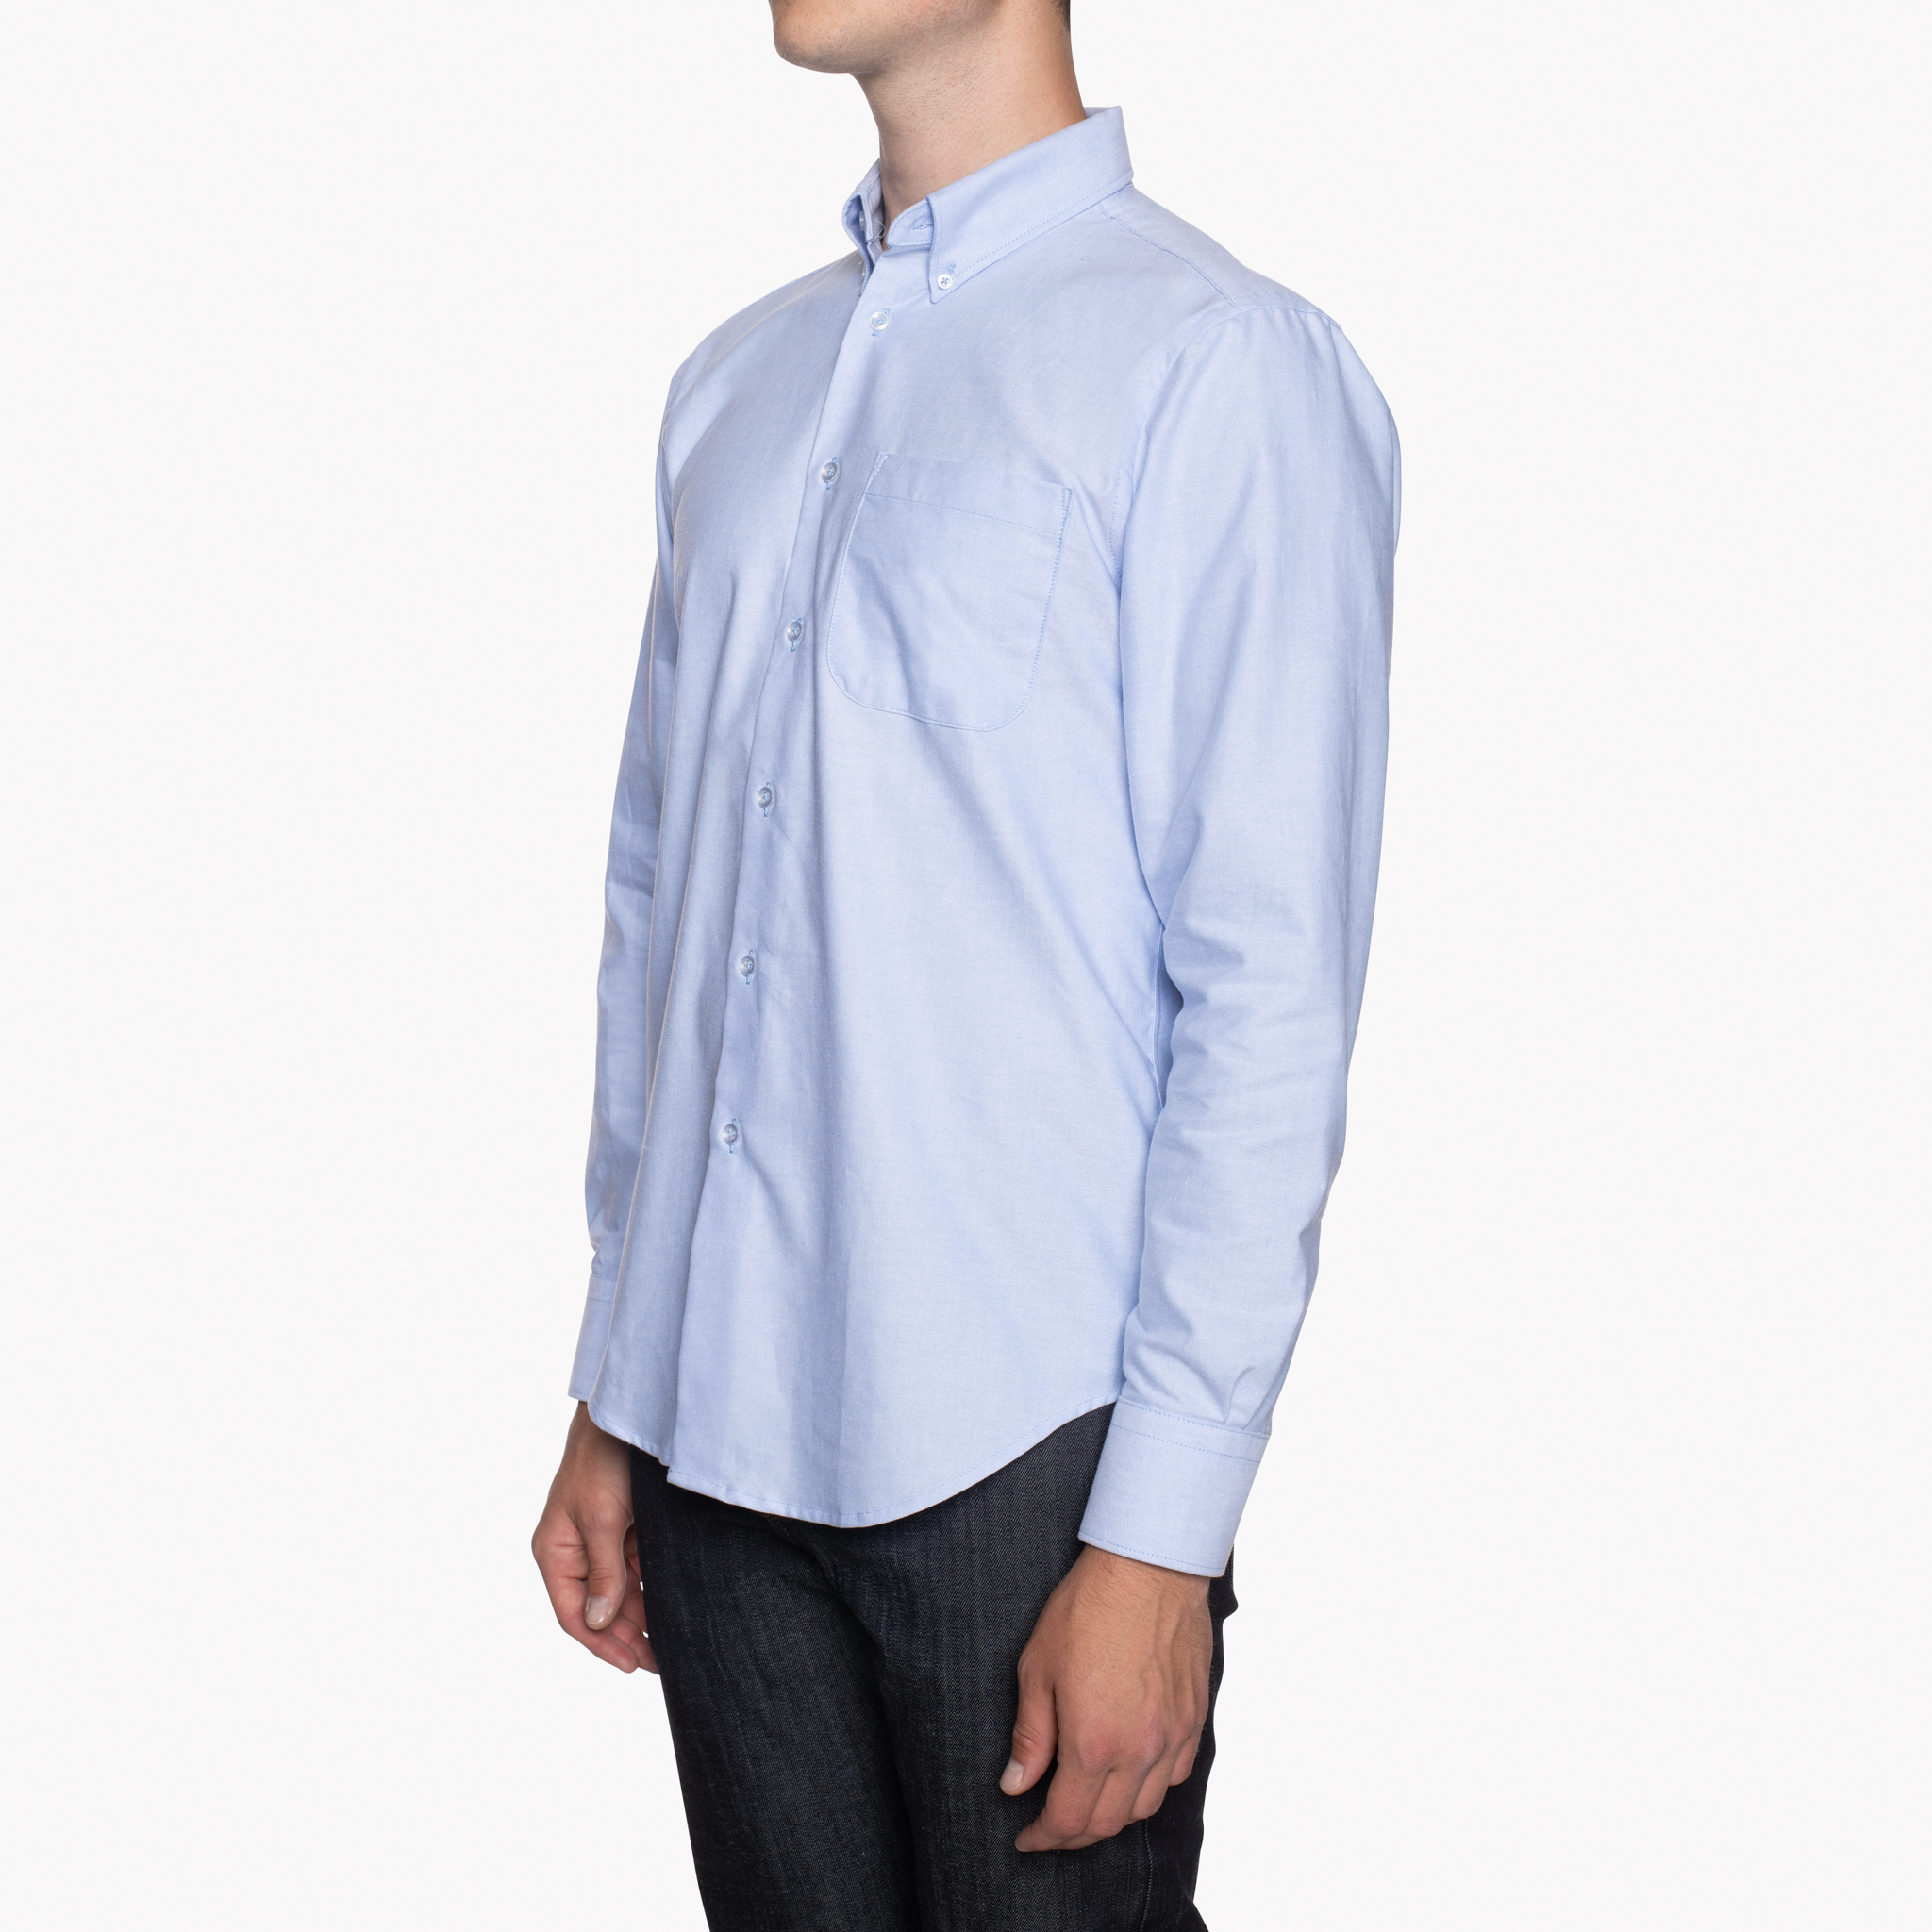  Easy Shirt - Cotton Oxford - Pale Blue - side 